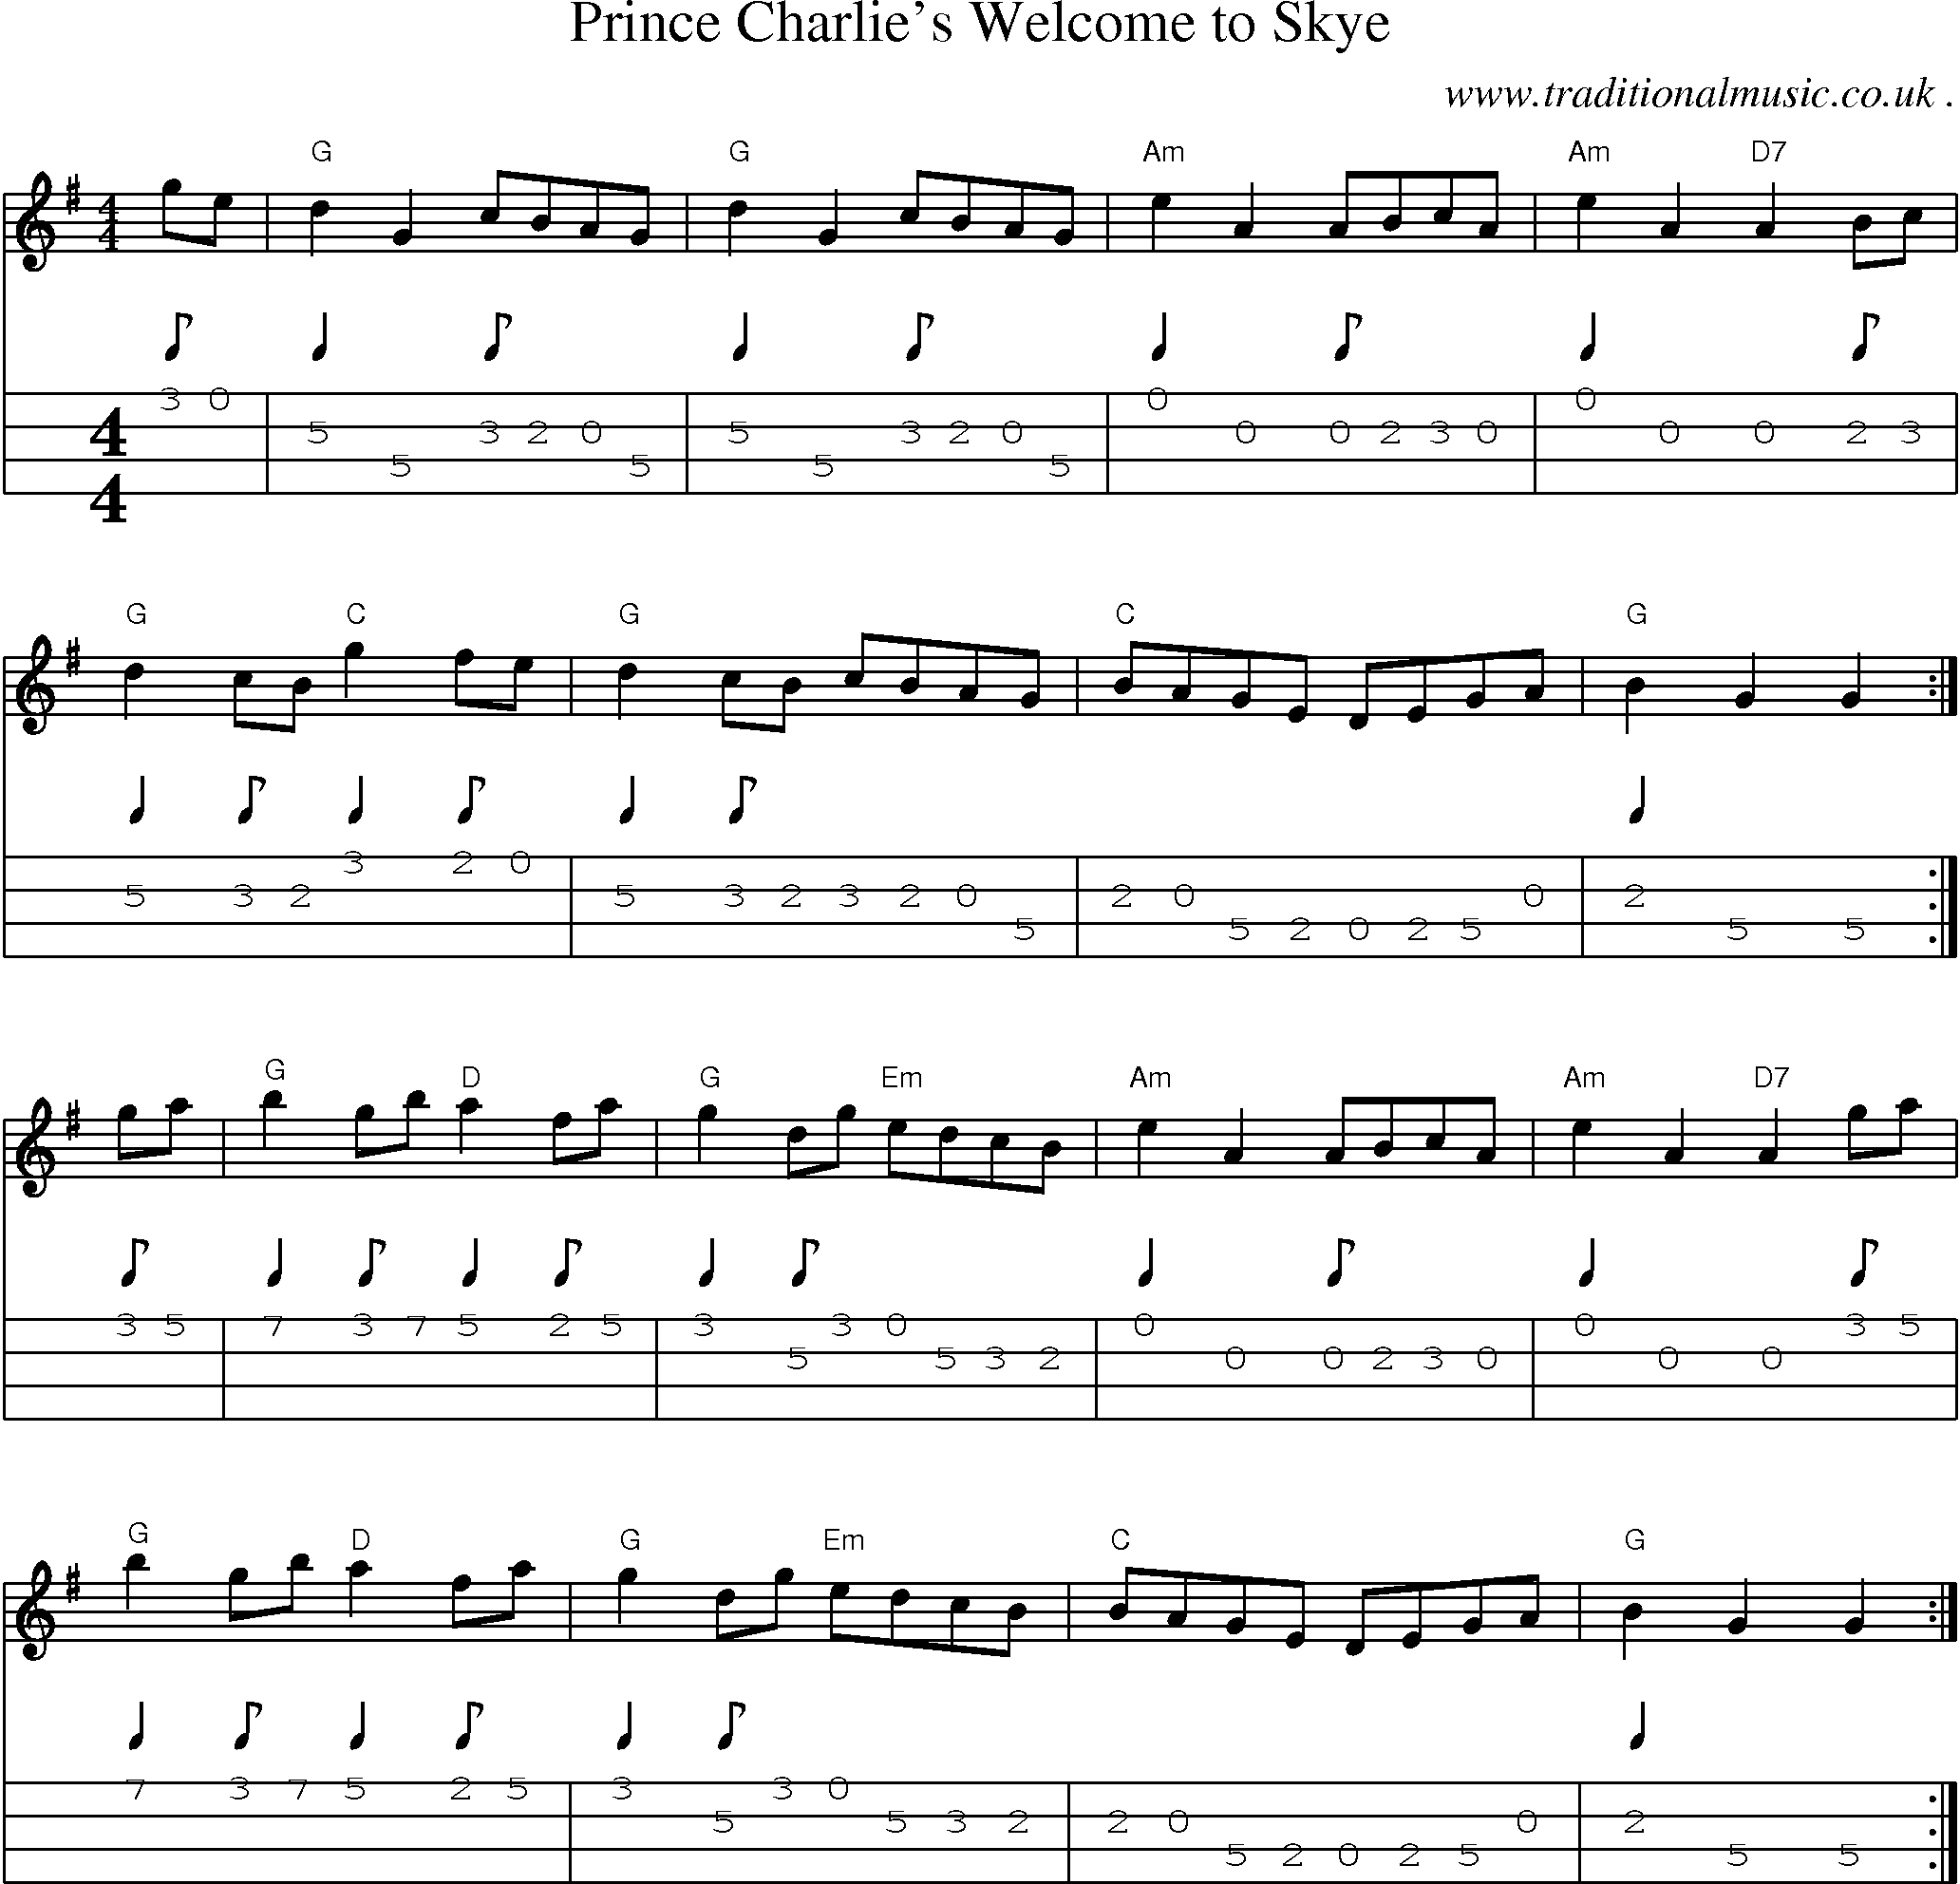 Sheet-music  score, Chords and Mandolin Tabs for Prince Charlies Welcome To Skye